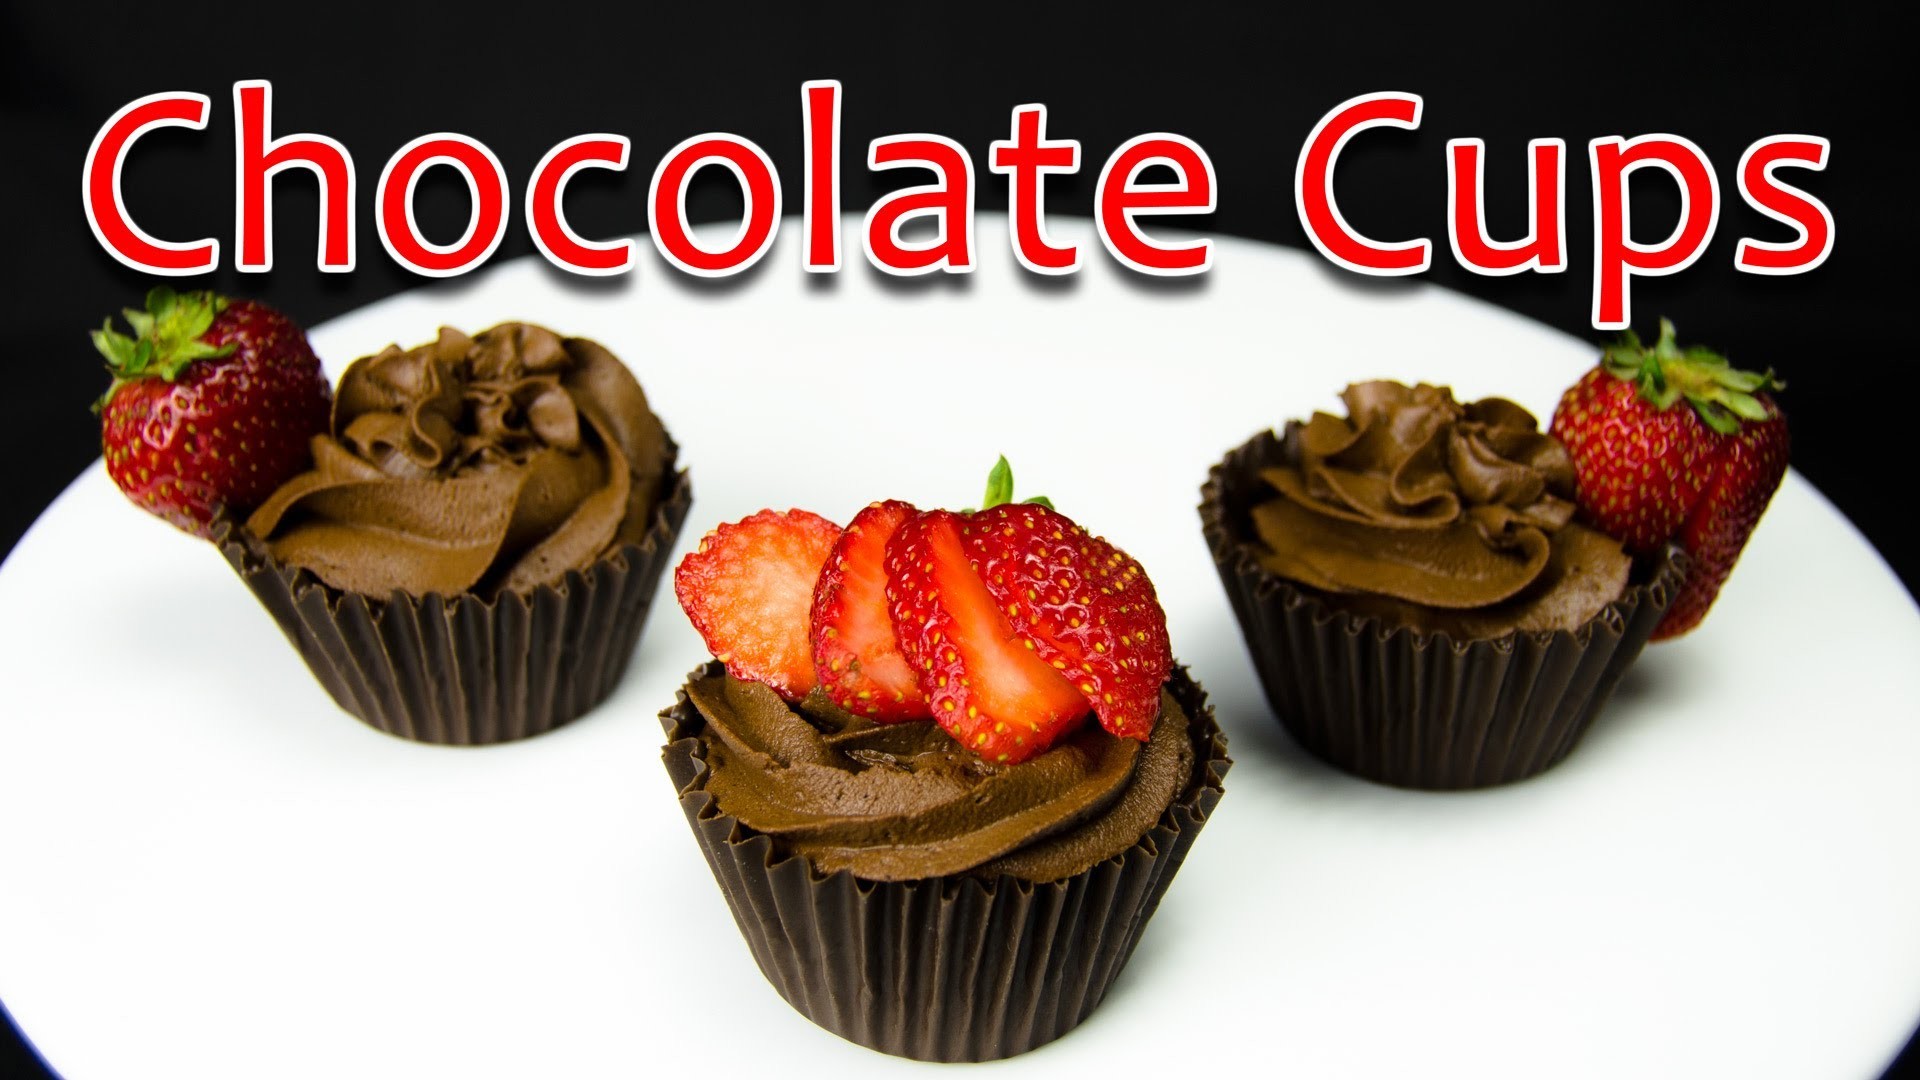 Chocolate cups. How to make Chocolate. CPR Cupcake.